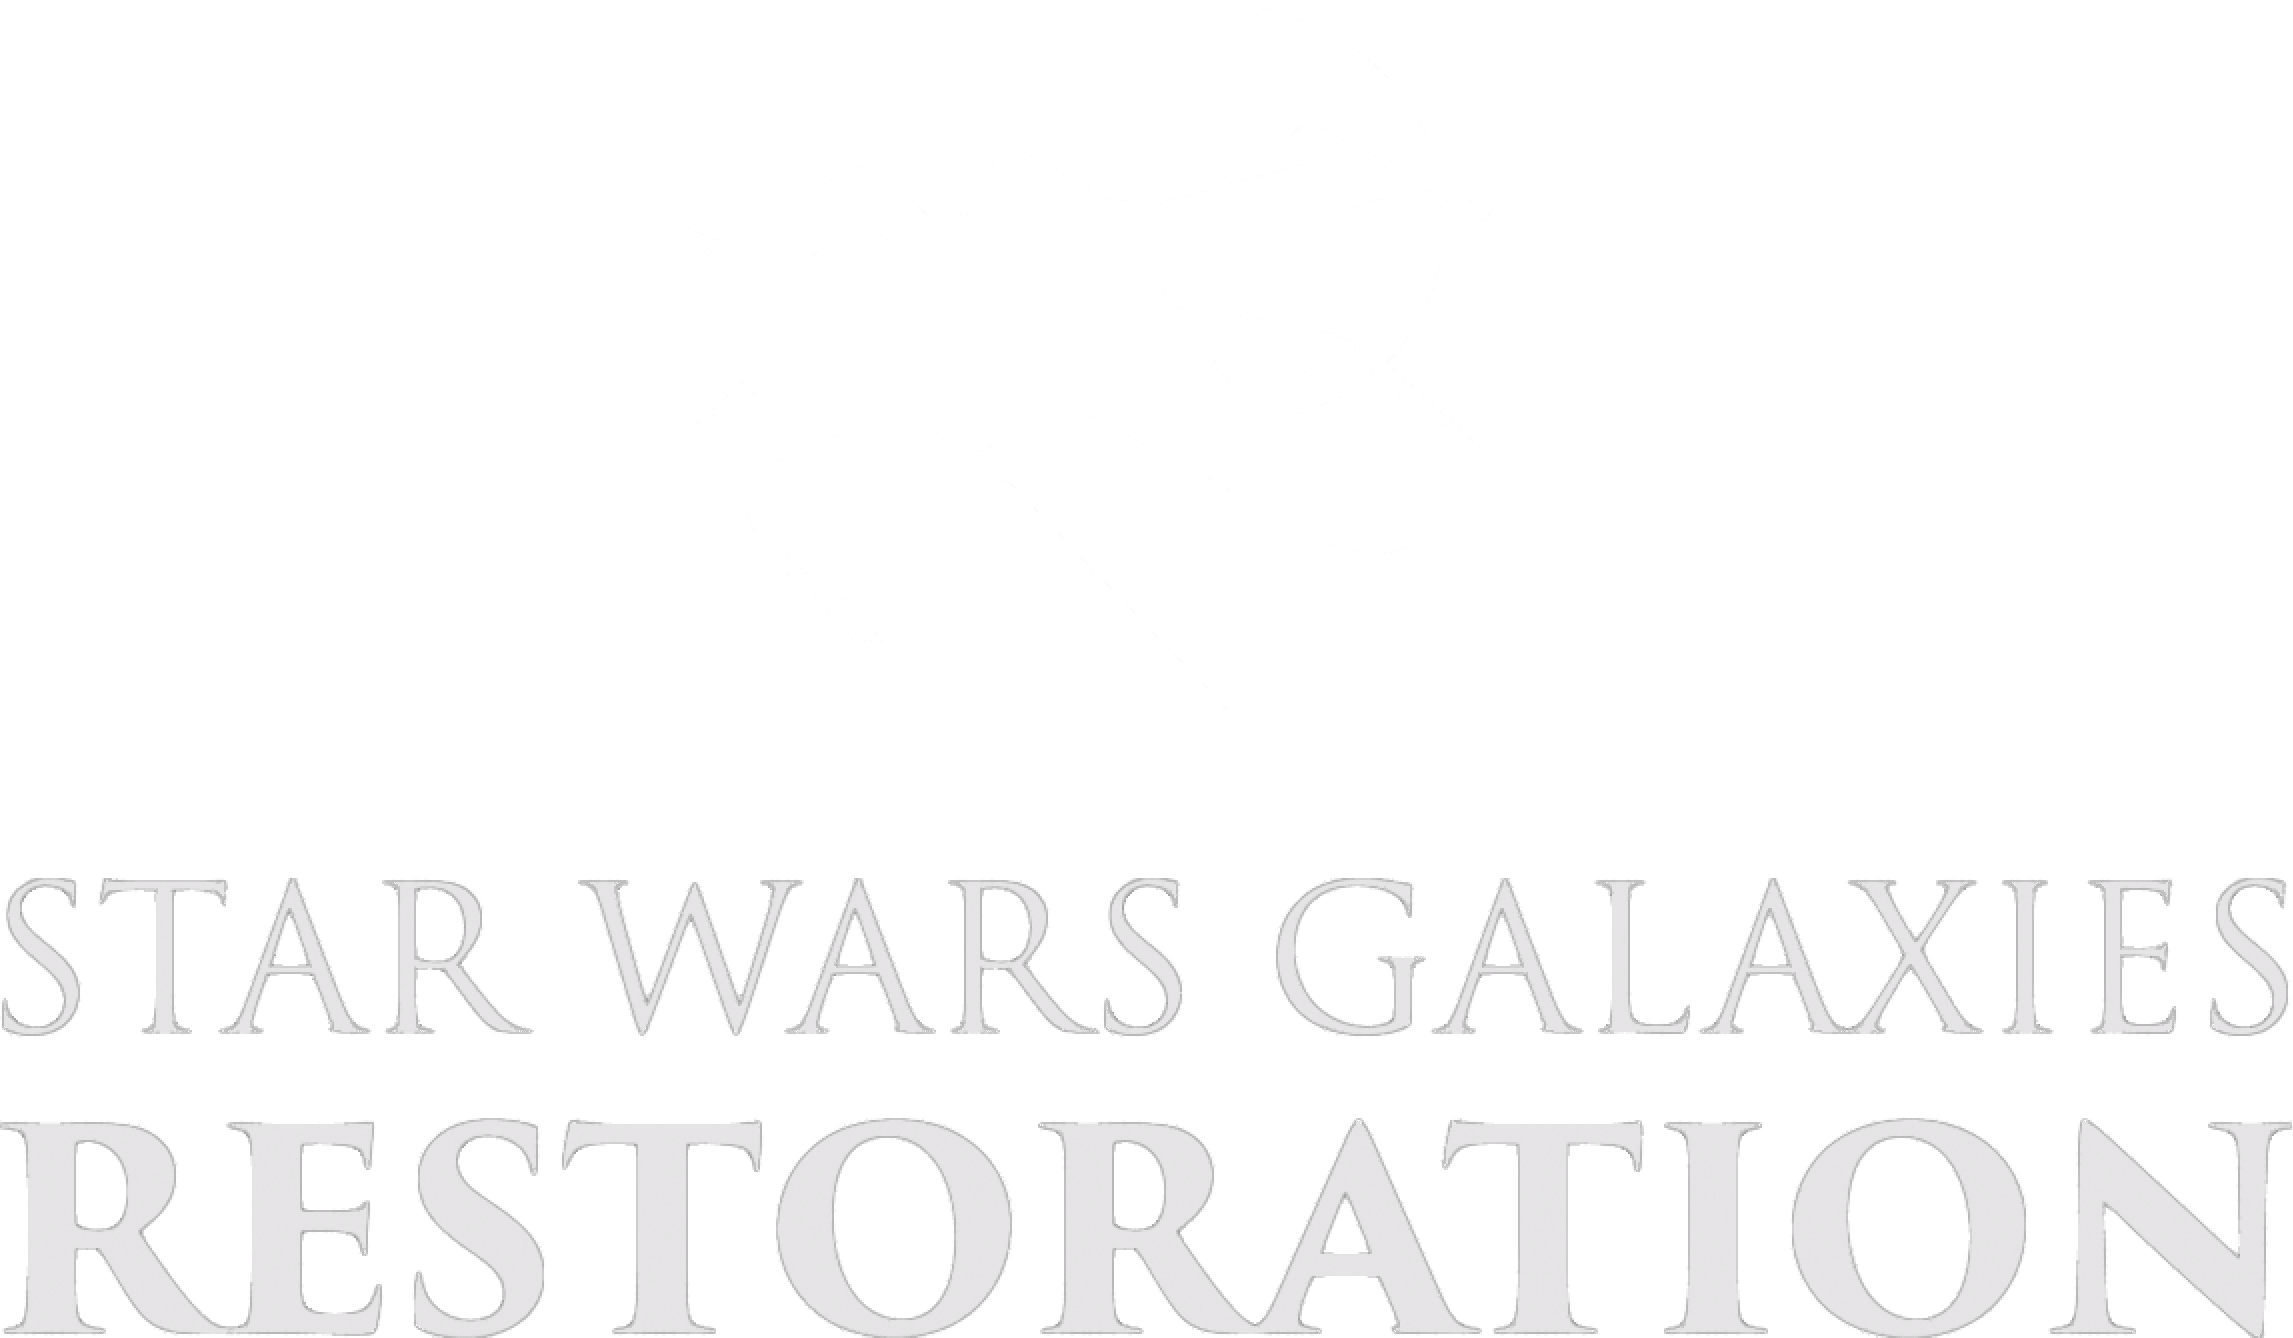 Two Years of Restoration: Celebrating the Successes and Looking Forward to the Future of Star Wars Galaxies